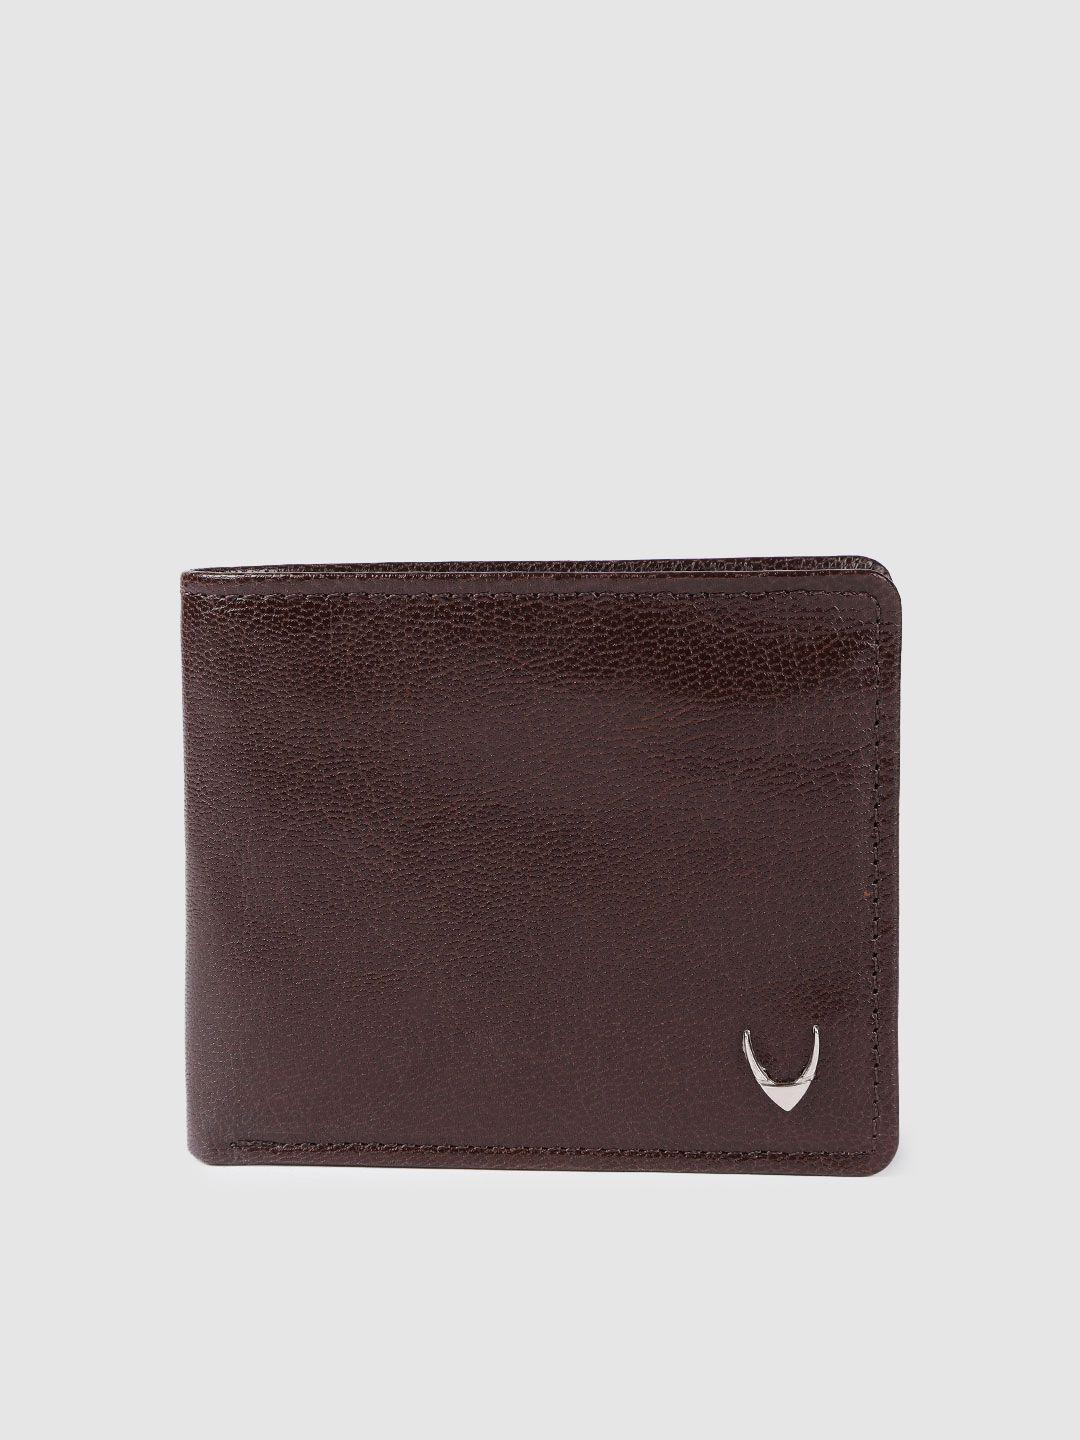 hidesign men brown leather two fold wallet